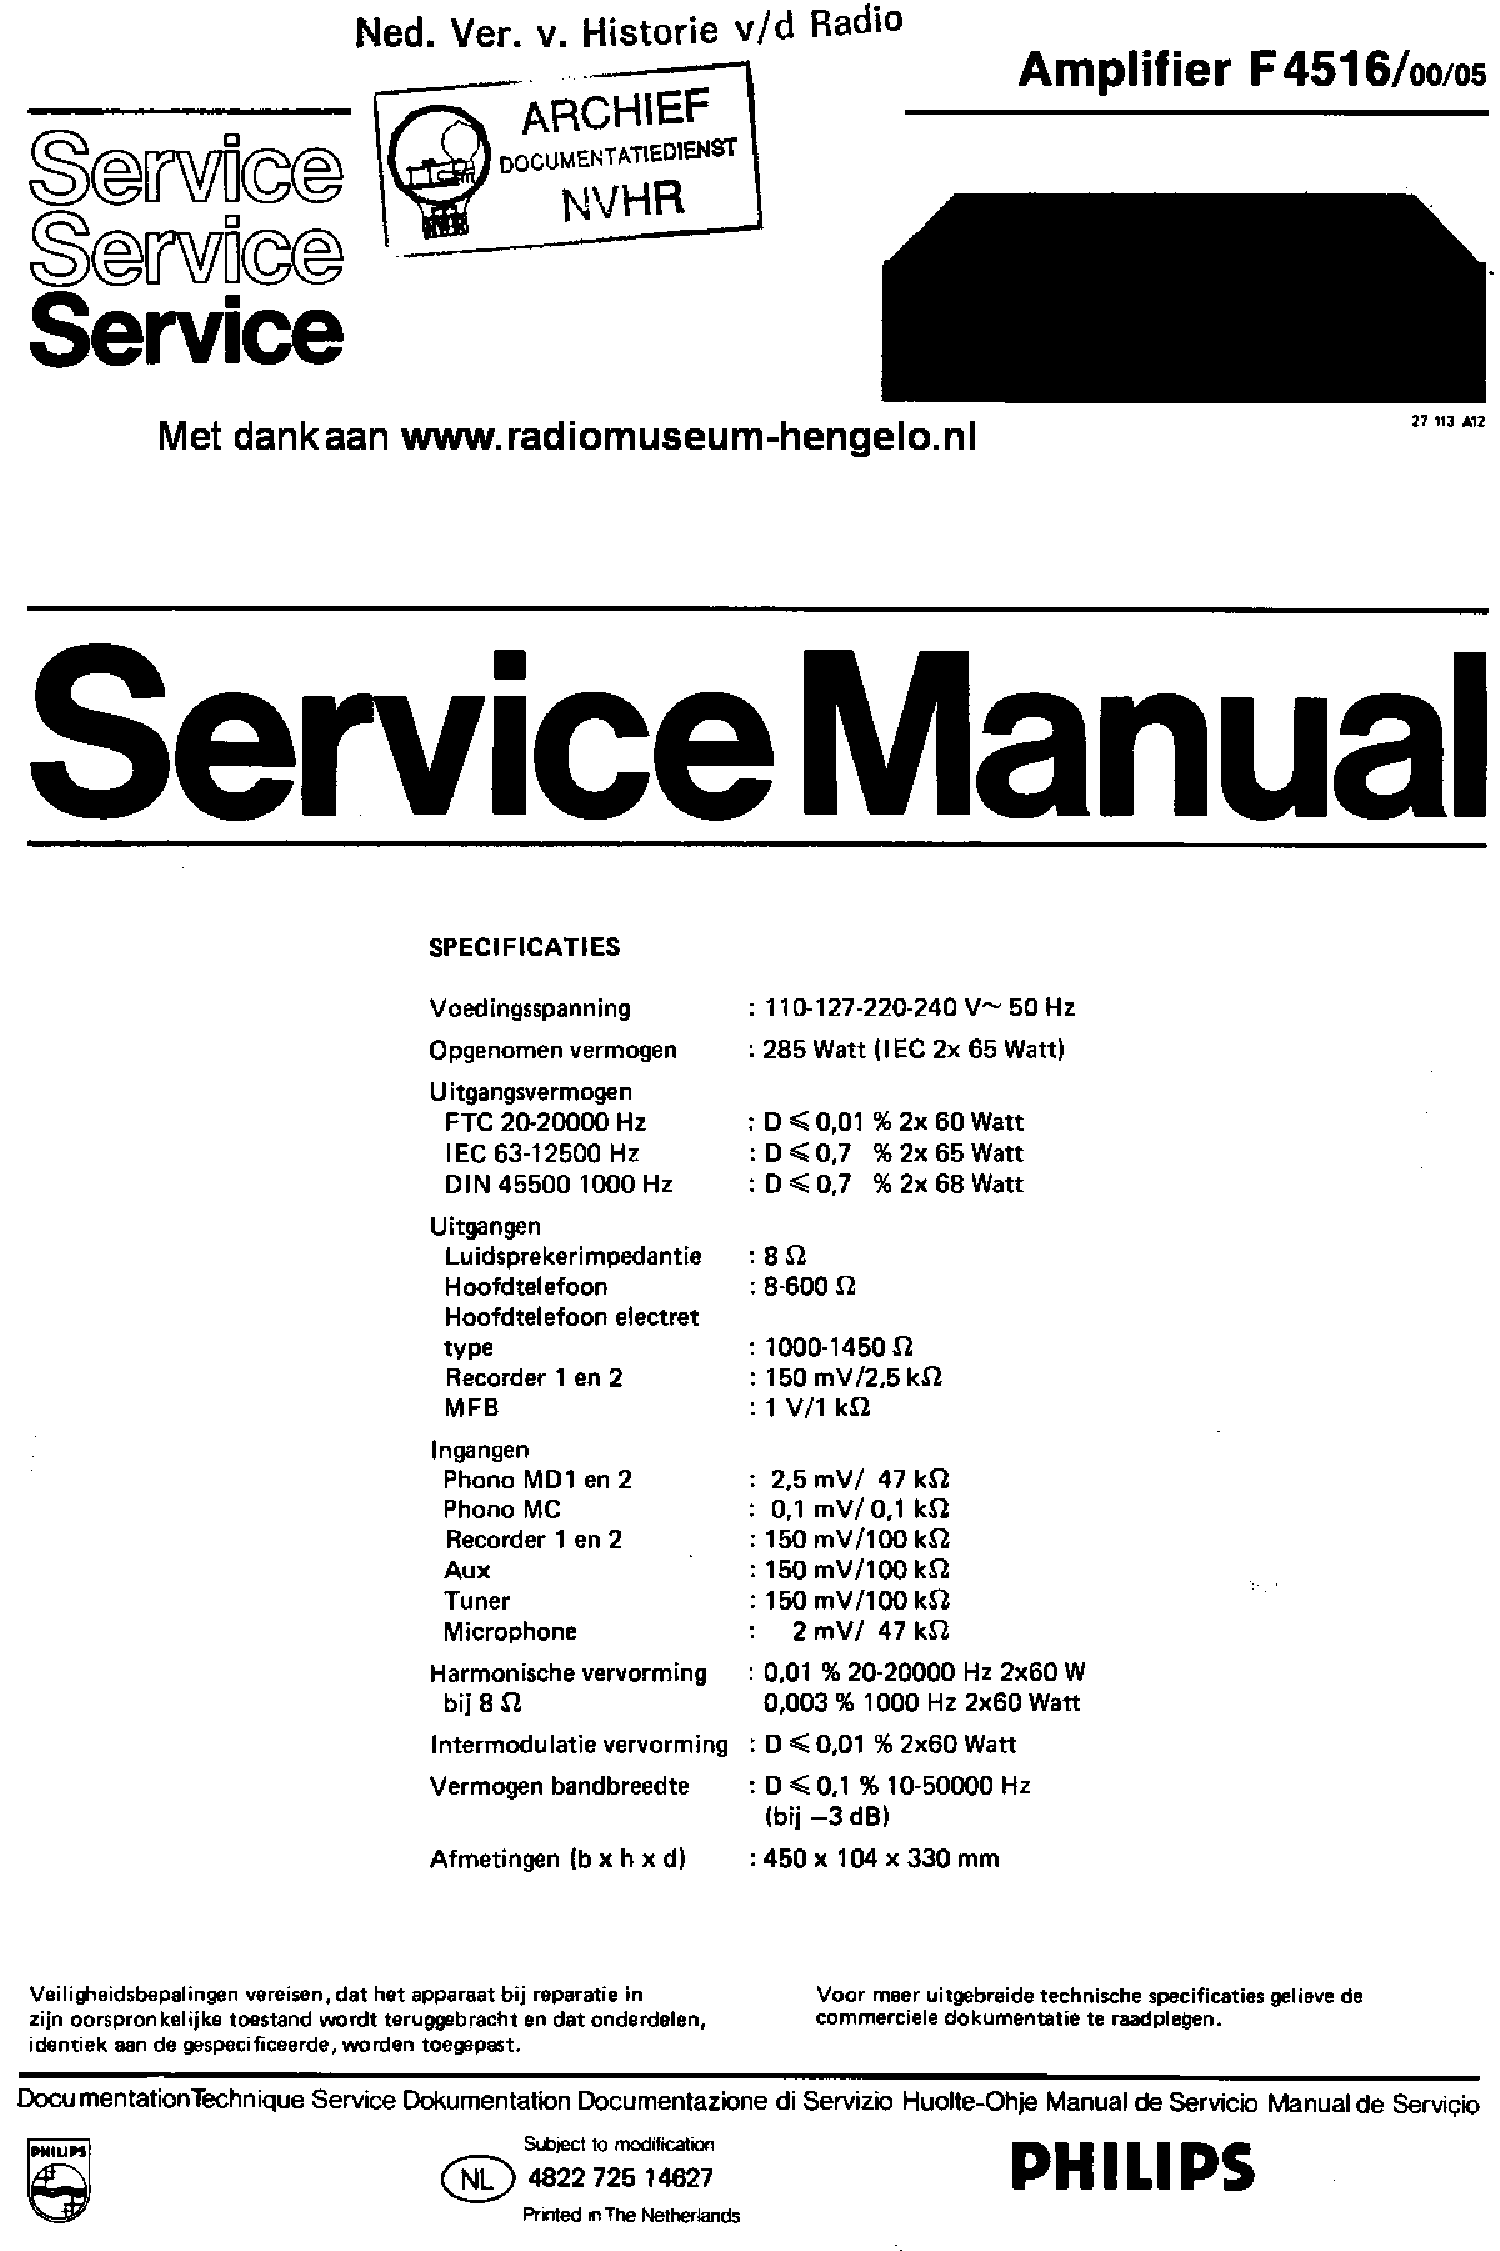 PHILIPS F4516 2X60W AMPLIFIER SM service manual (1st page)